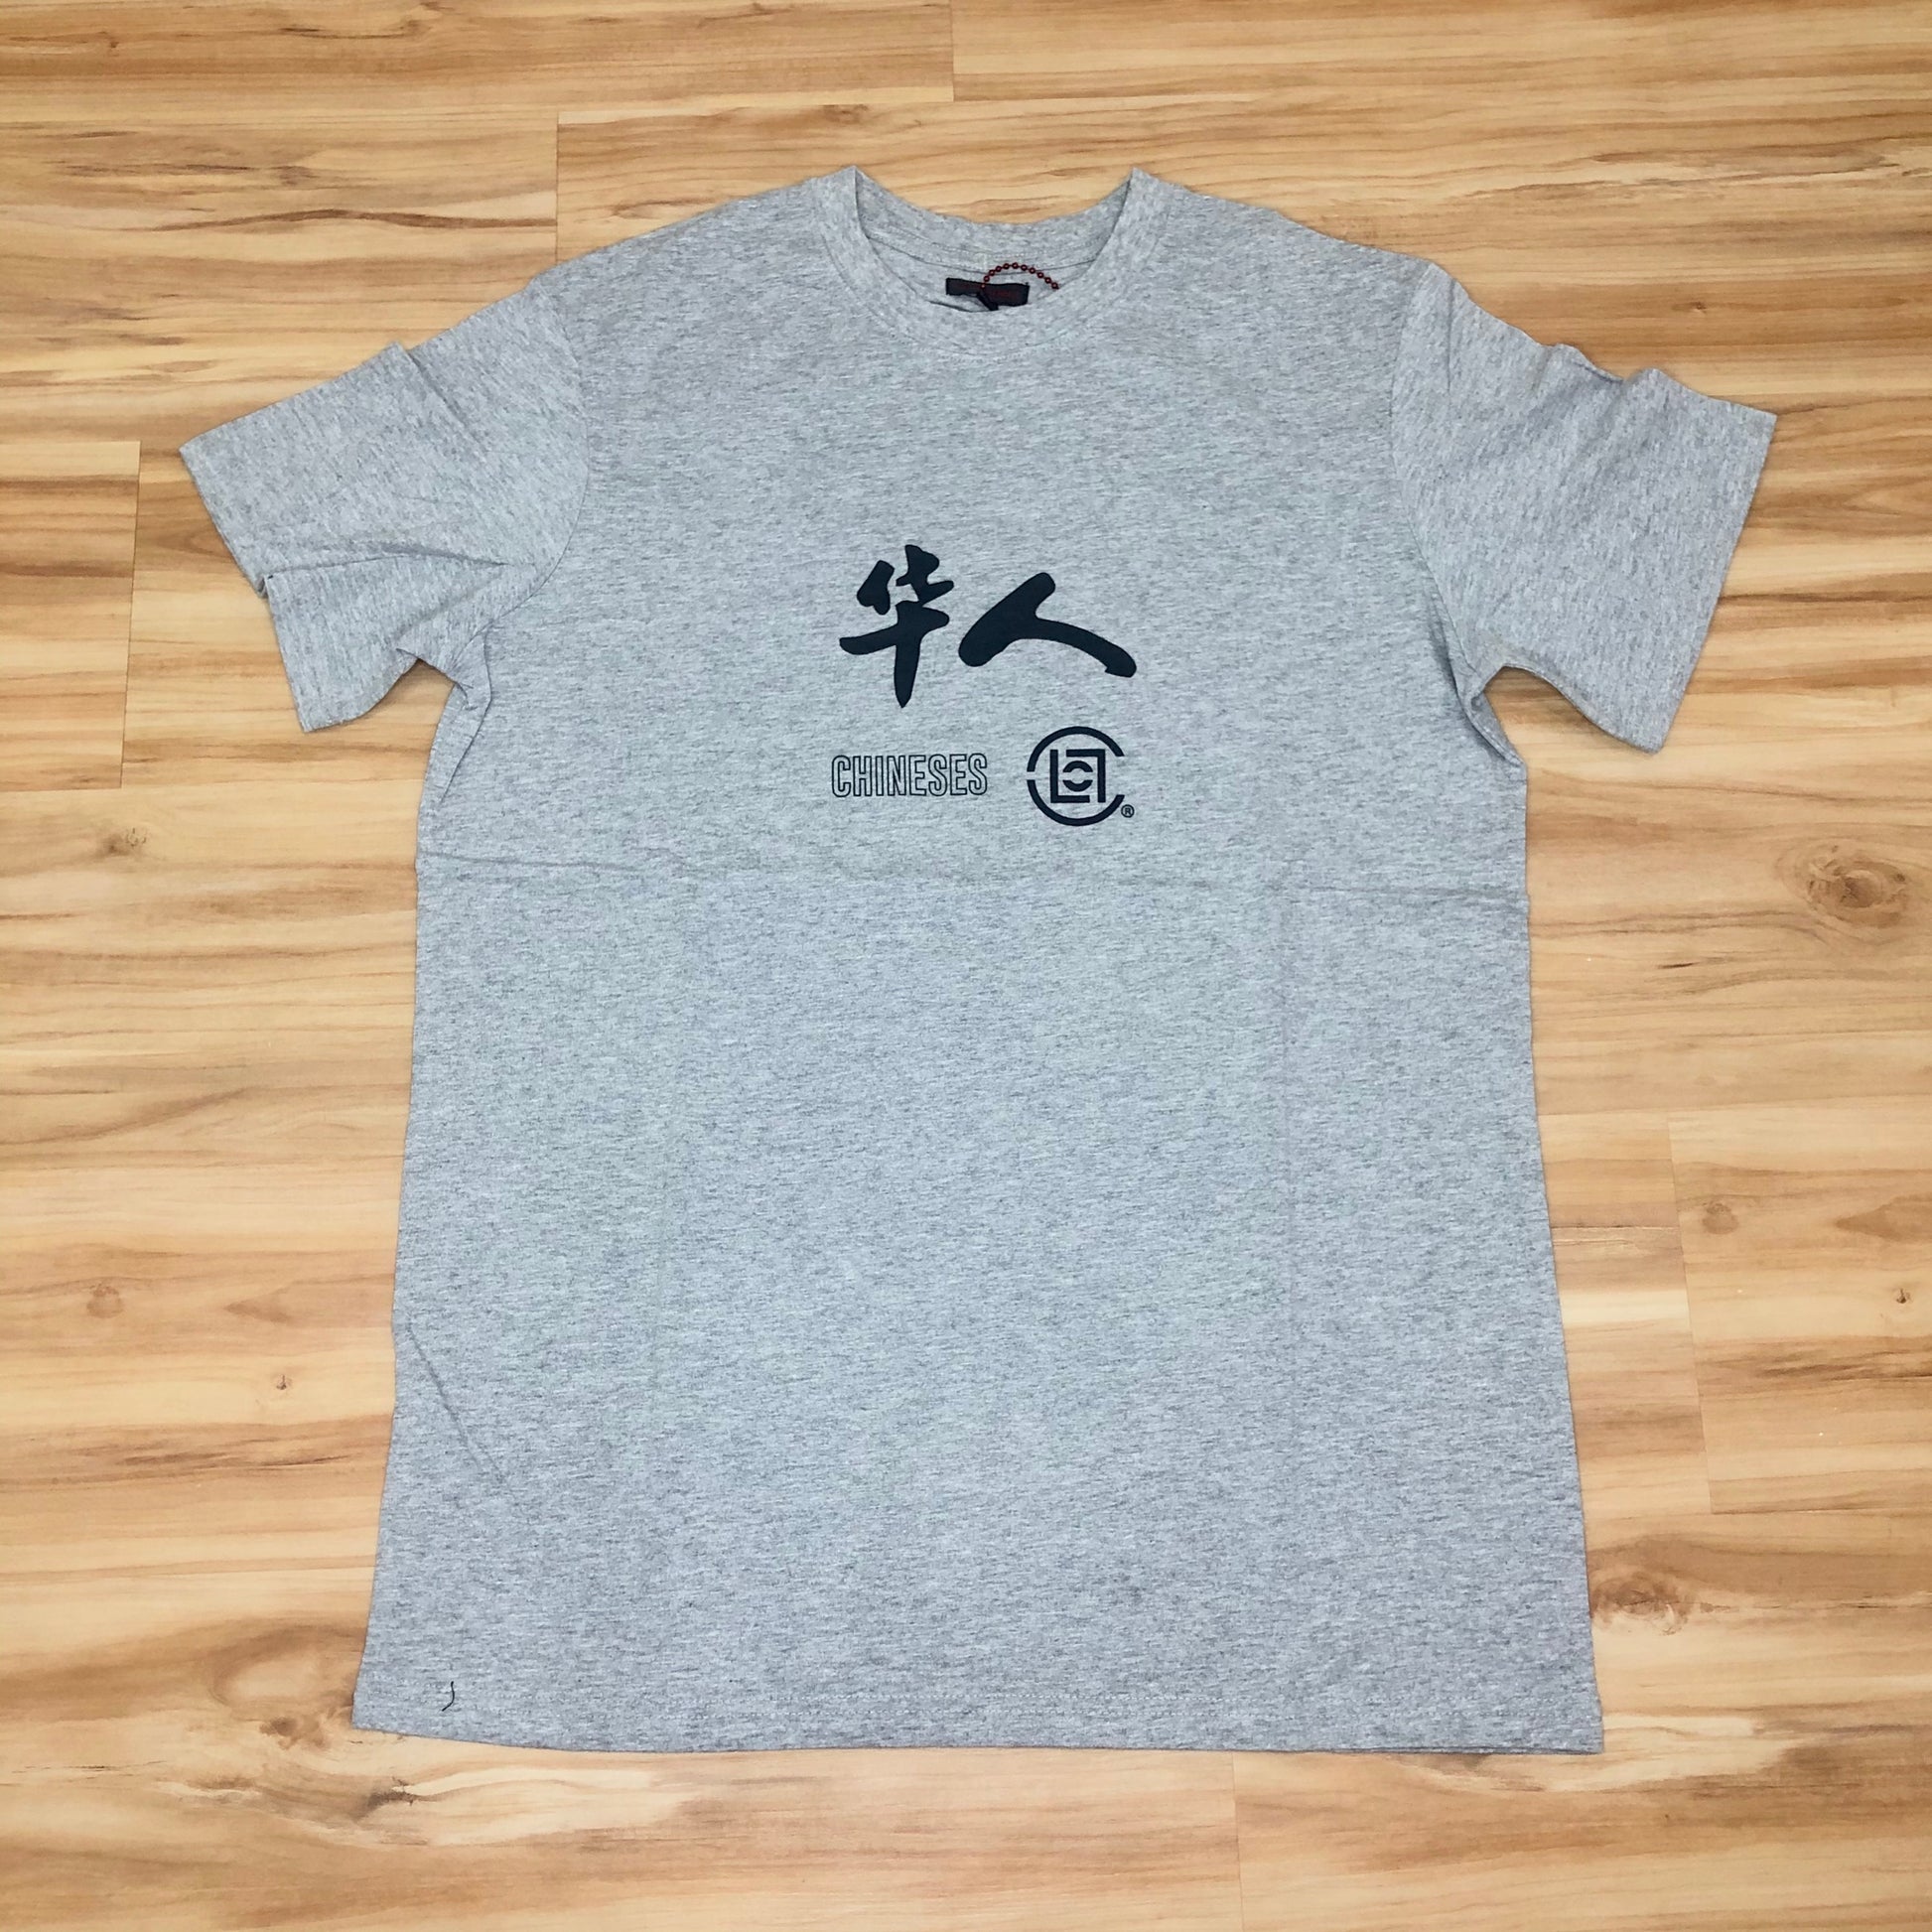 Clot 华人 Grey T-Shirt - Shop Streetwear, Sneakers, Slippers and Gifts online | Malaysia - The Factory KL